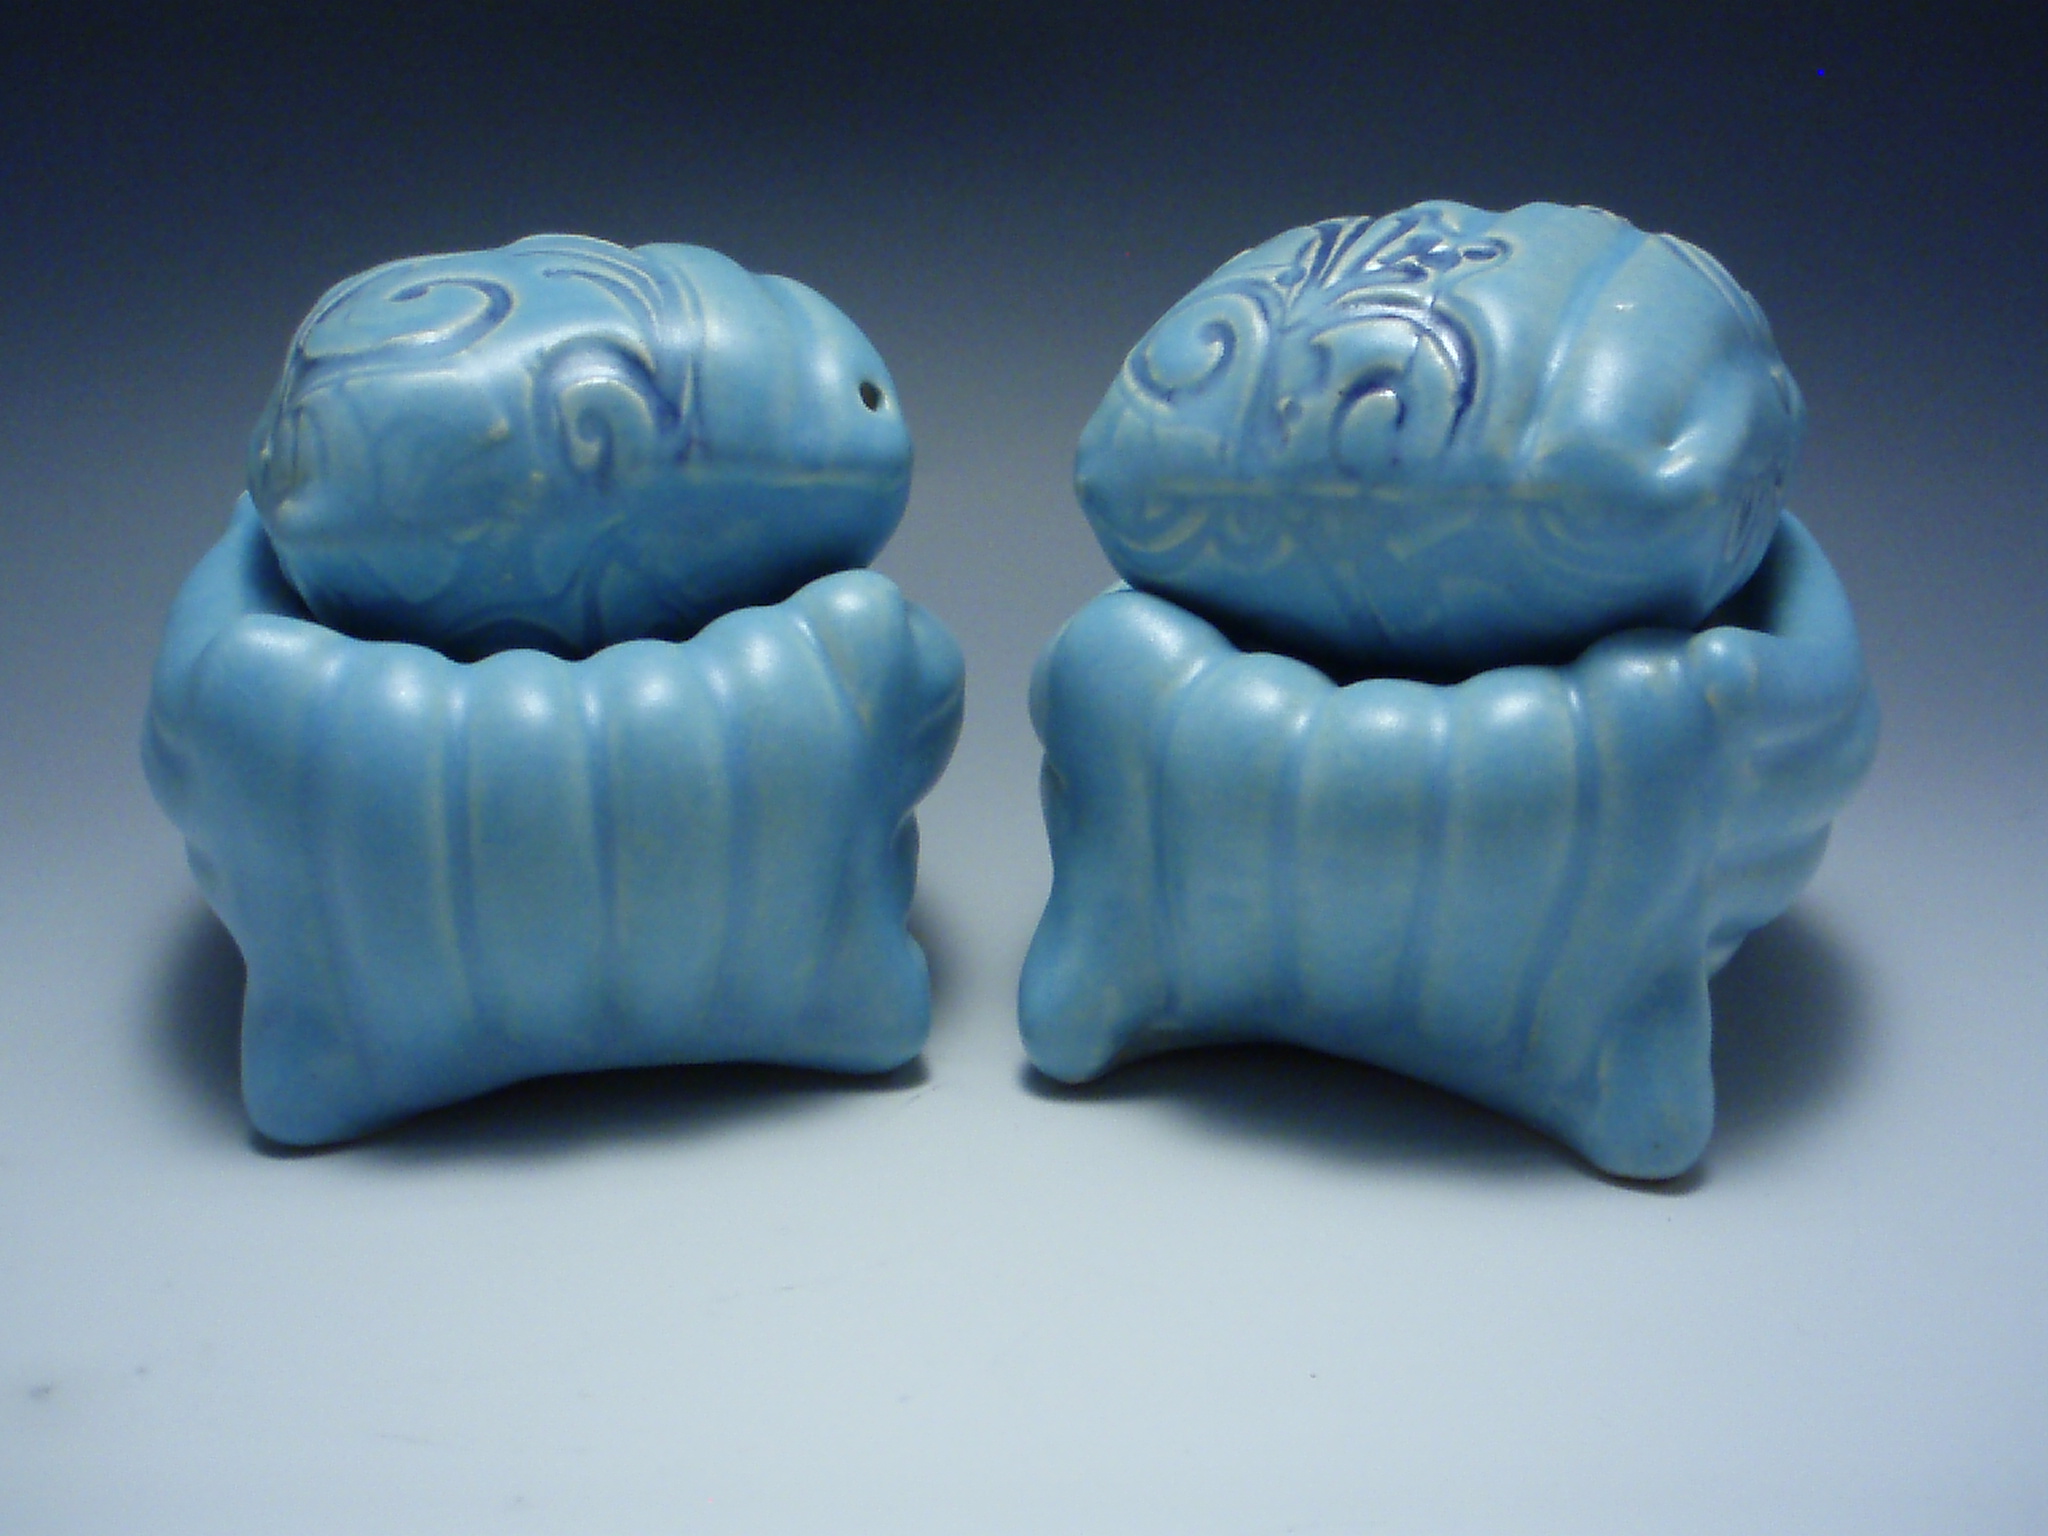 blue salt and pepper cubes on cushions, 2007